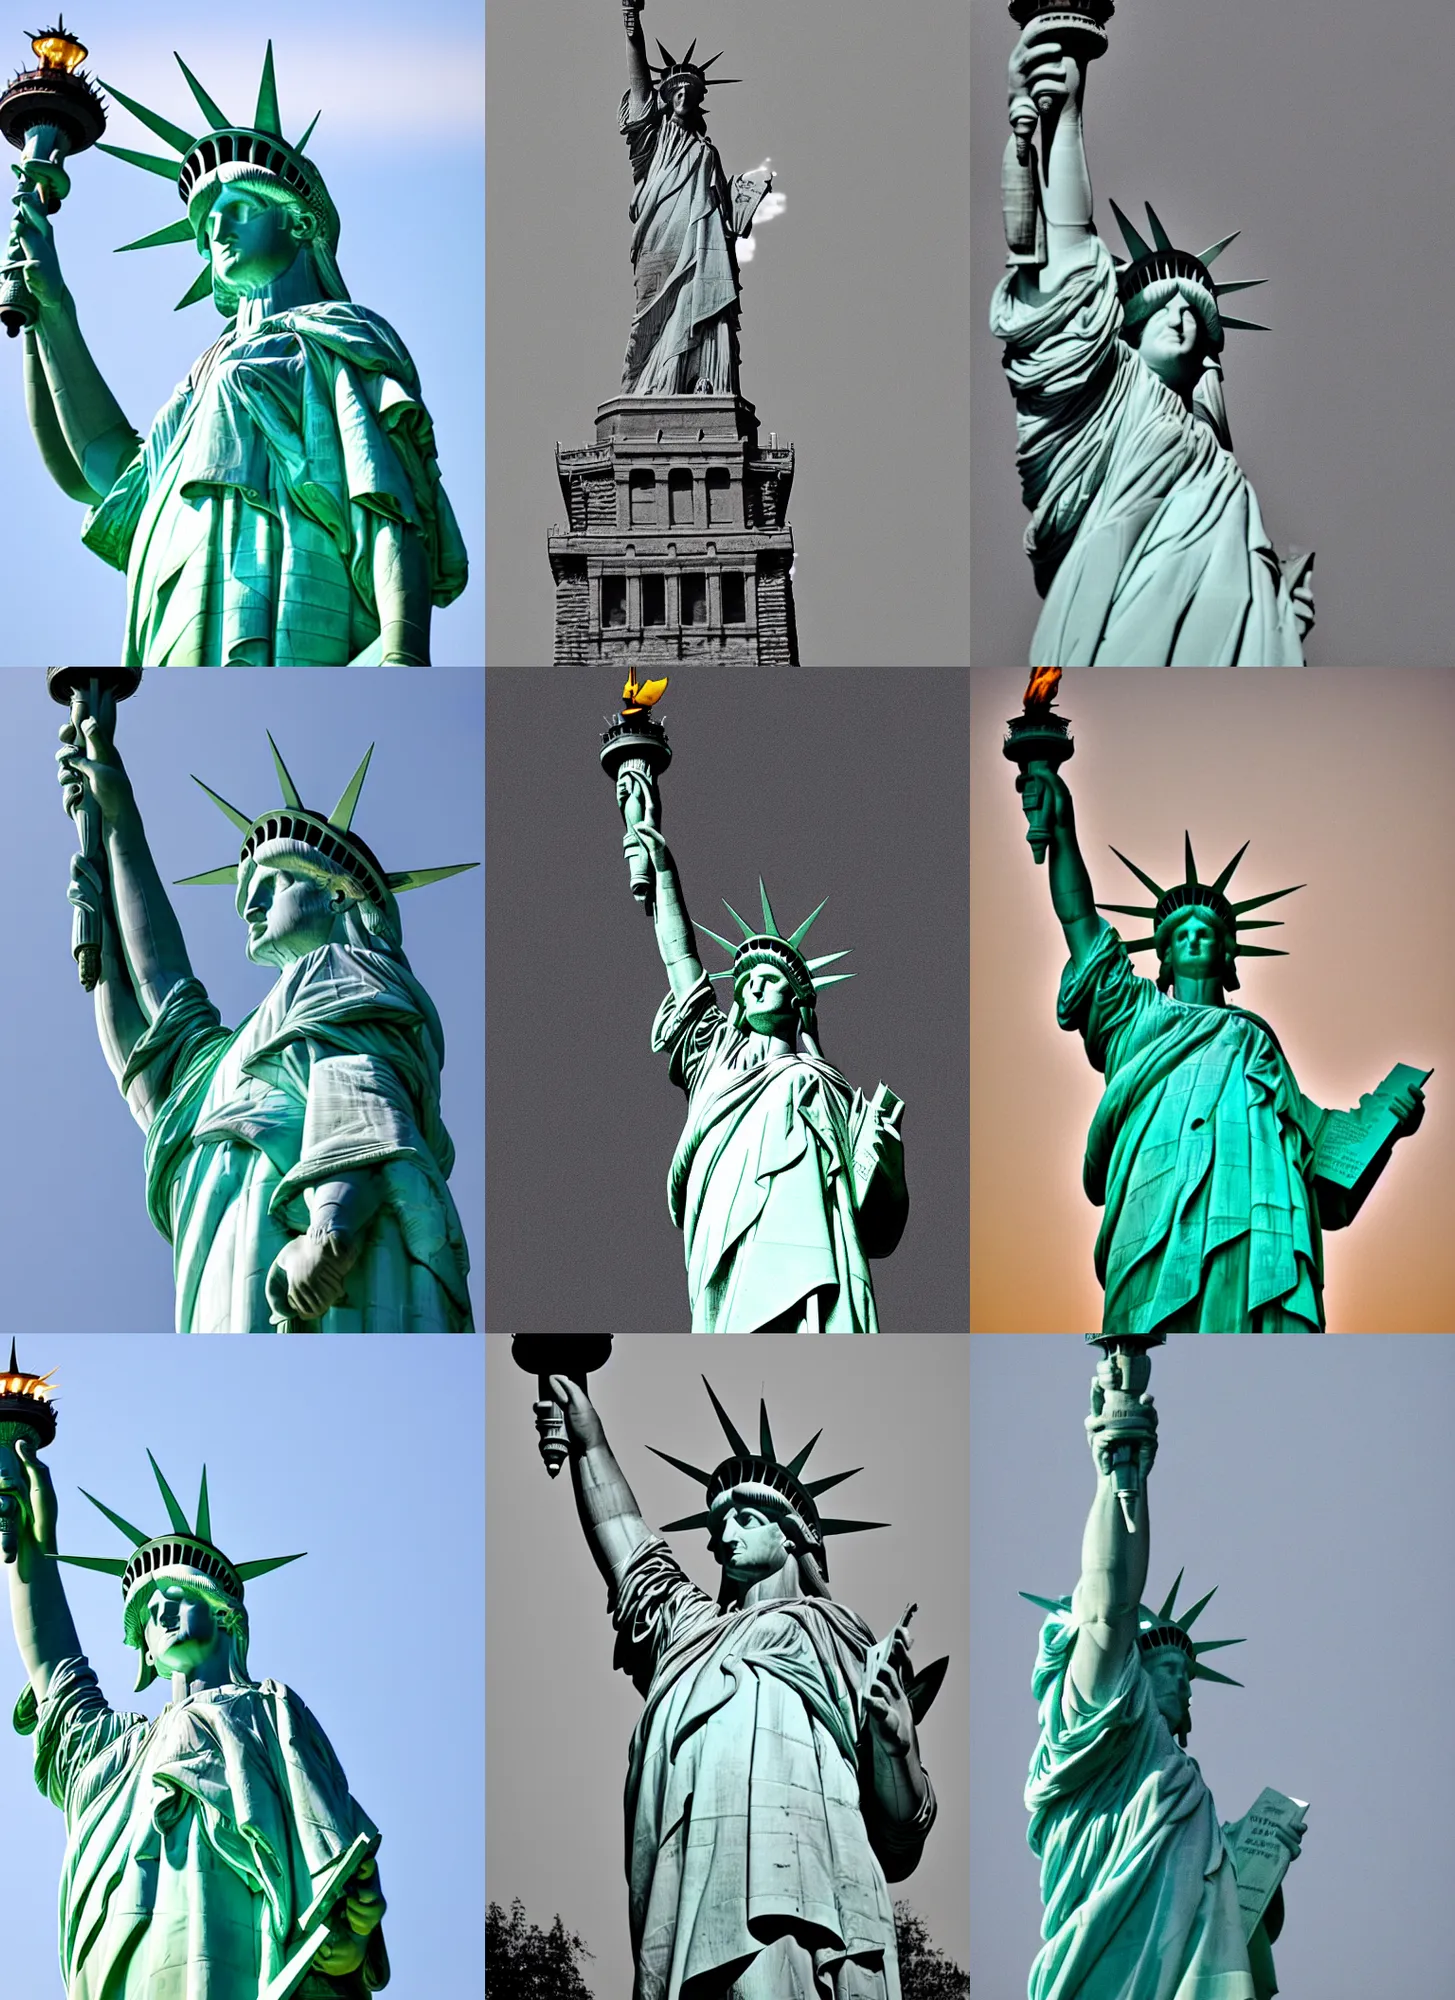 Prompt: the statue of liberty winking playfully to camera